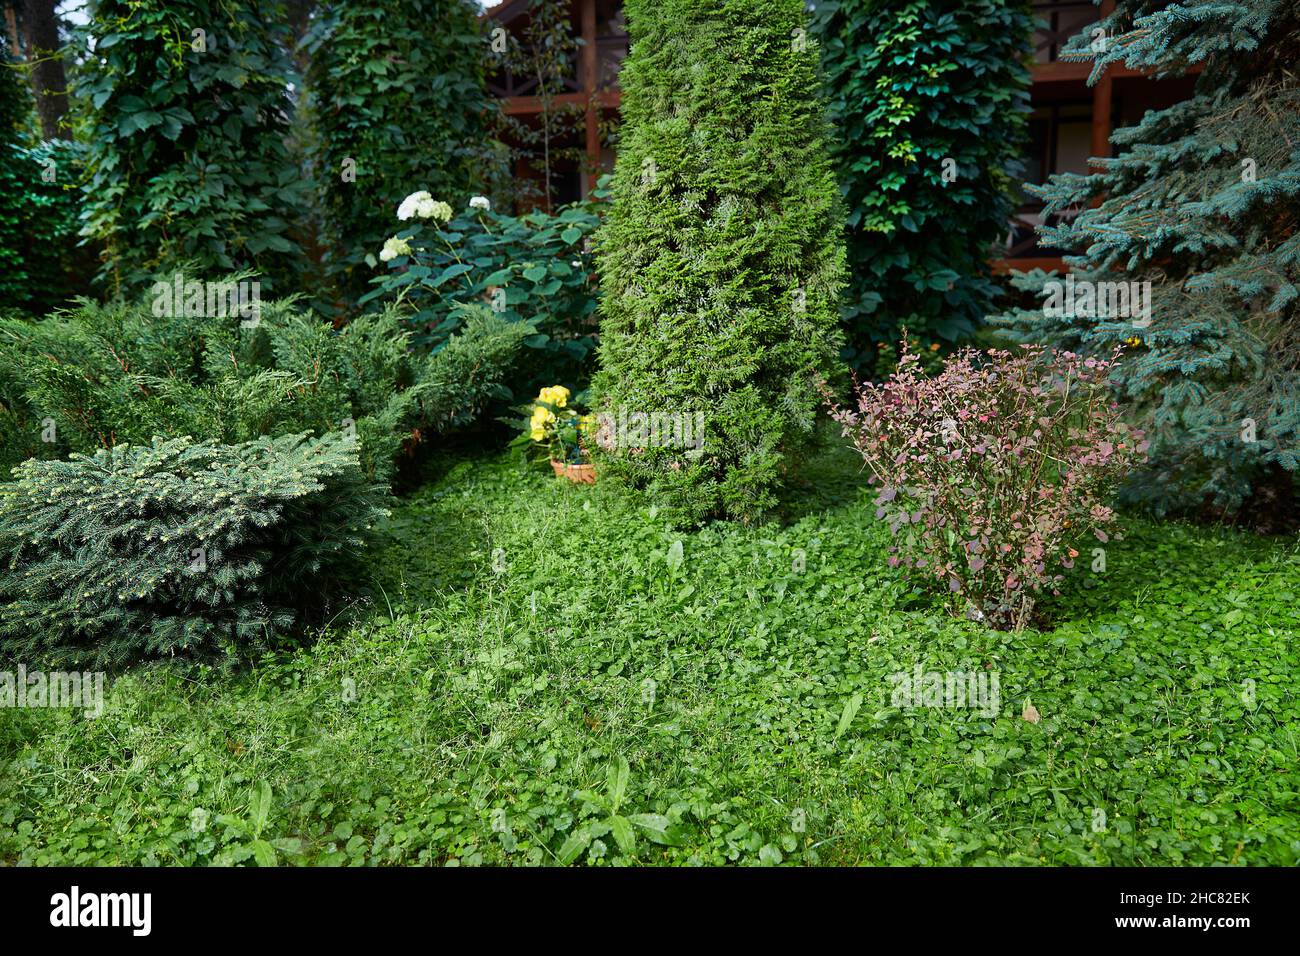 green garden with dwarf spruce, thuja, barberry, hydrangea, wild grapes, blue spruce Copy space Stock Photo